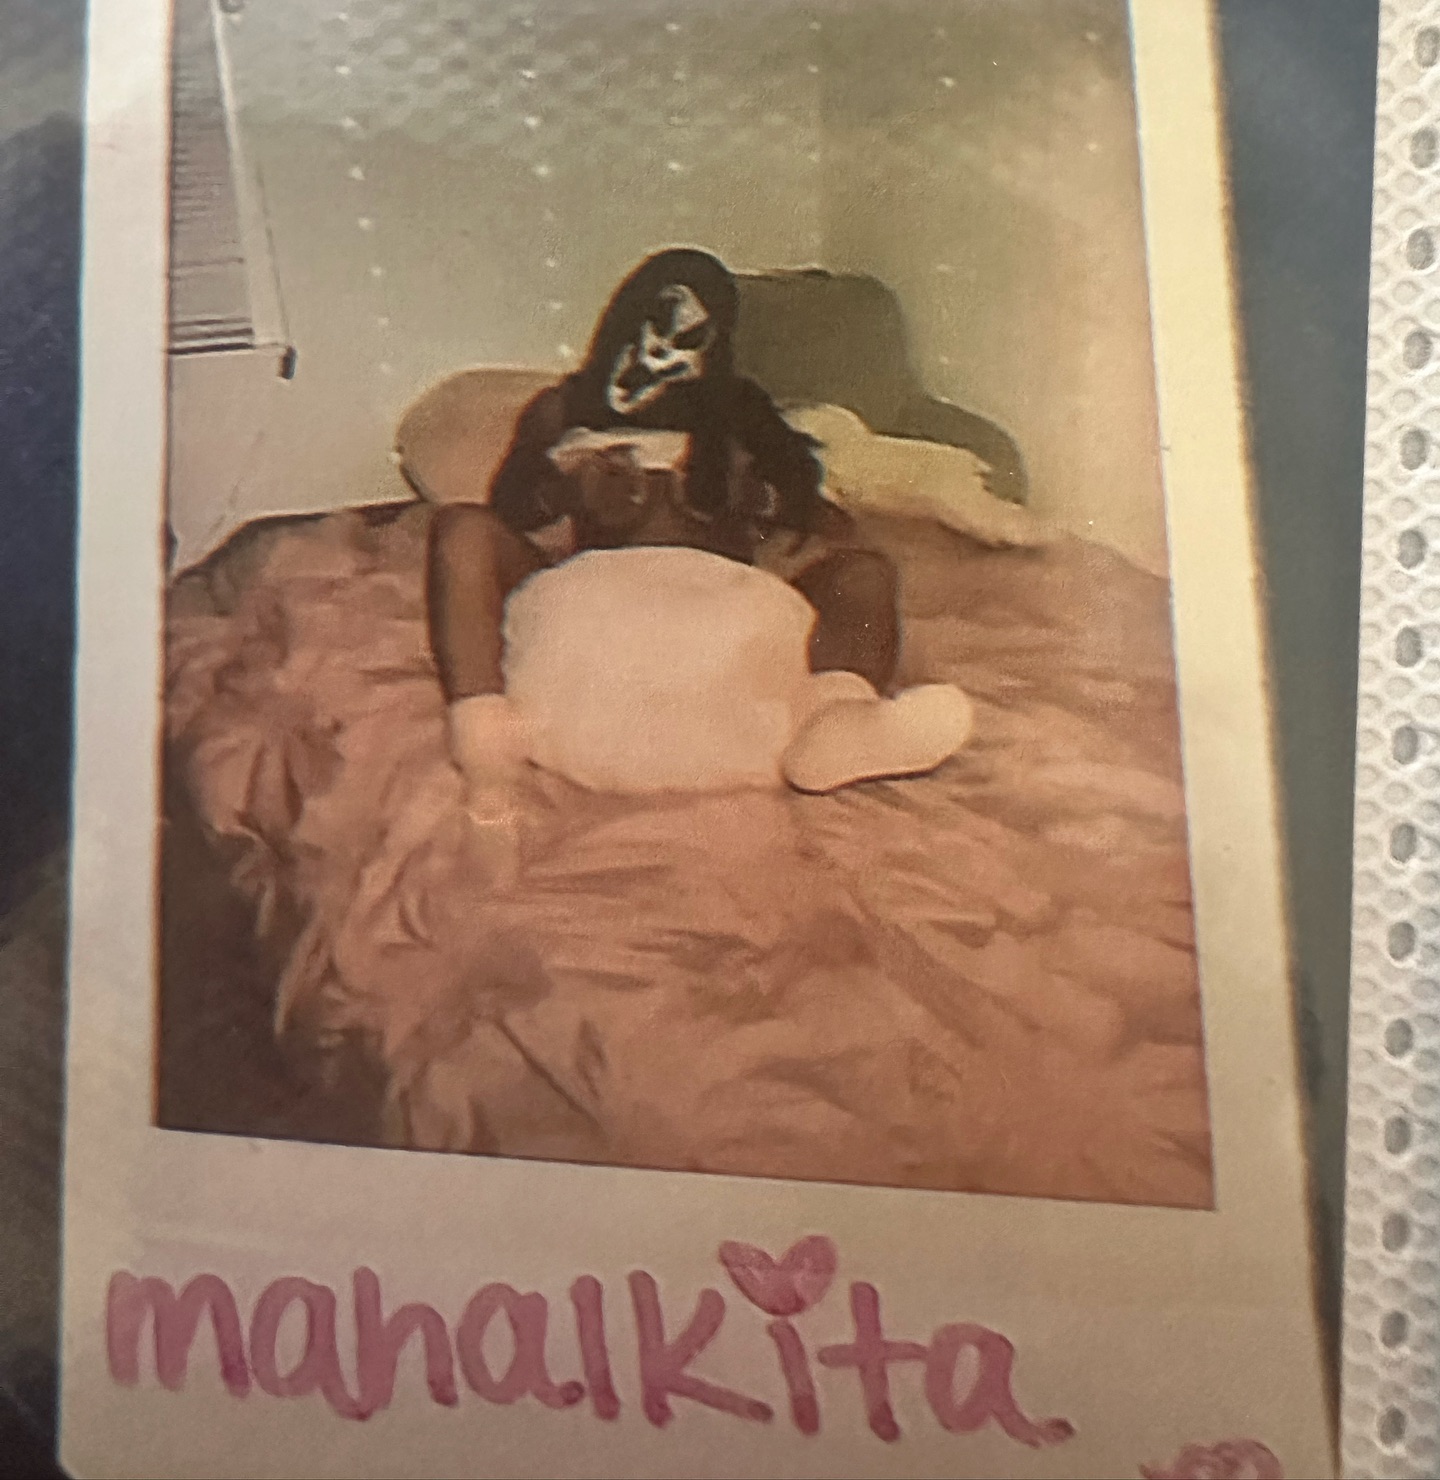 spooky hoe type shit poppin polaroid #me #draft #monday #ootd #fyp